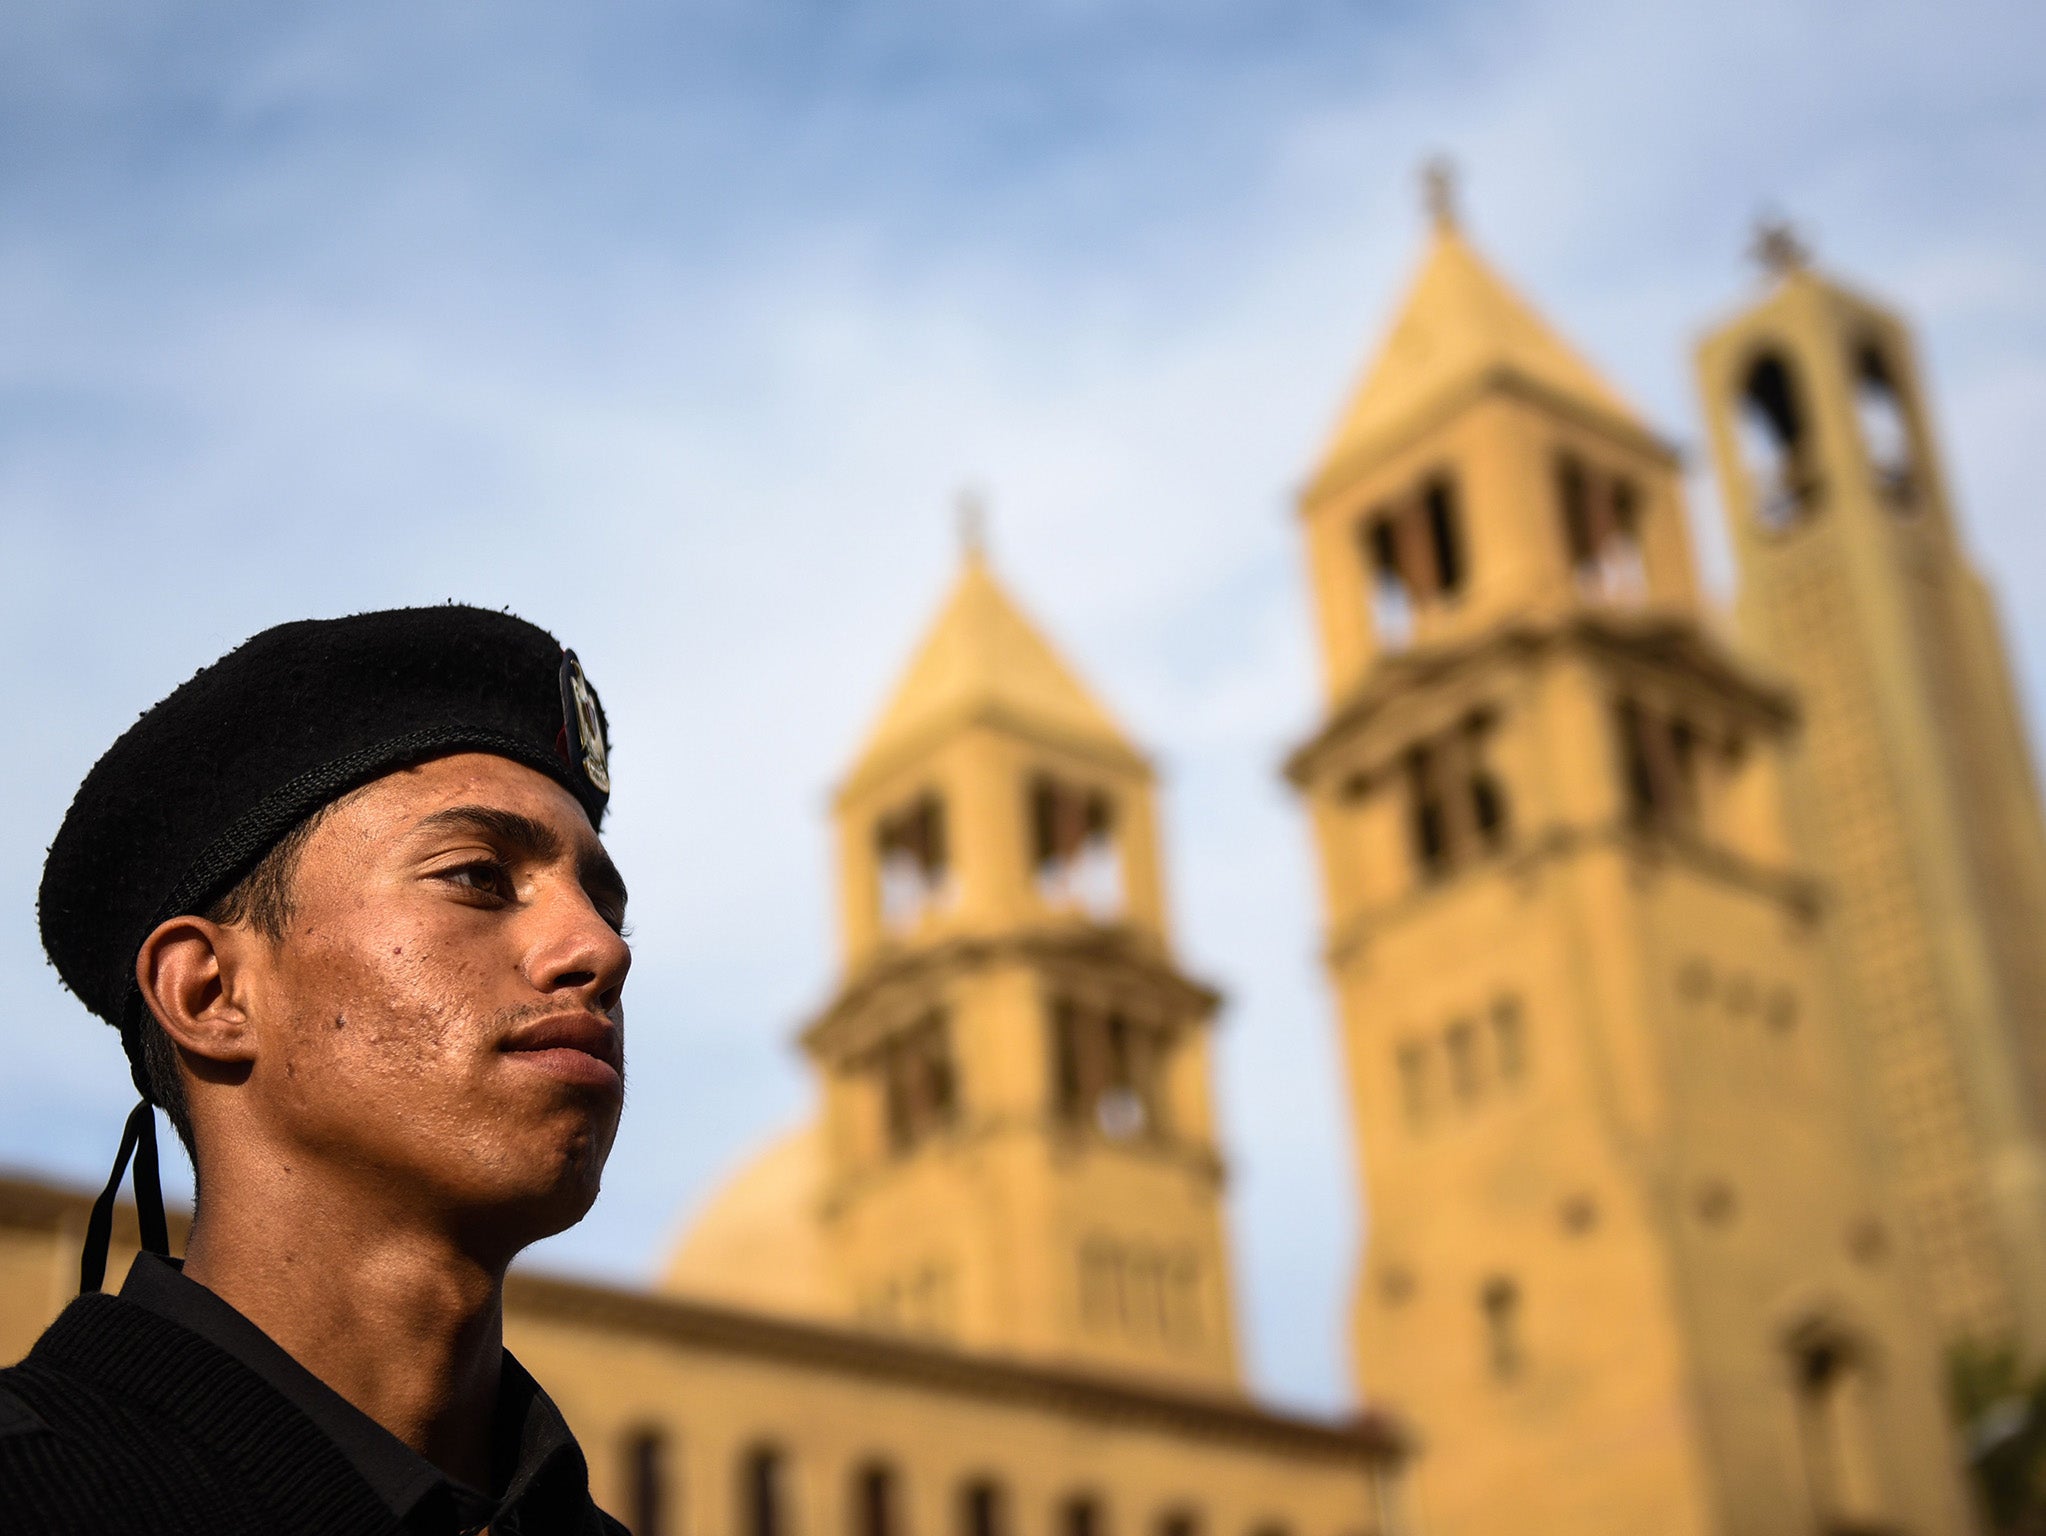 An Egyptian policeman stands in front of the Saint Peter and Paul Coptic Orthodox church